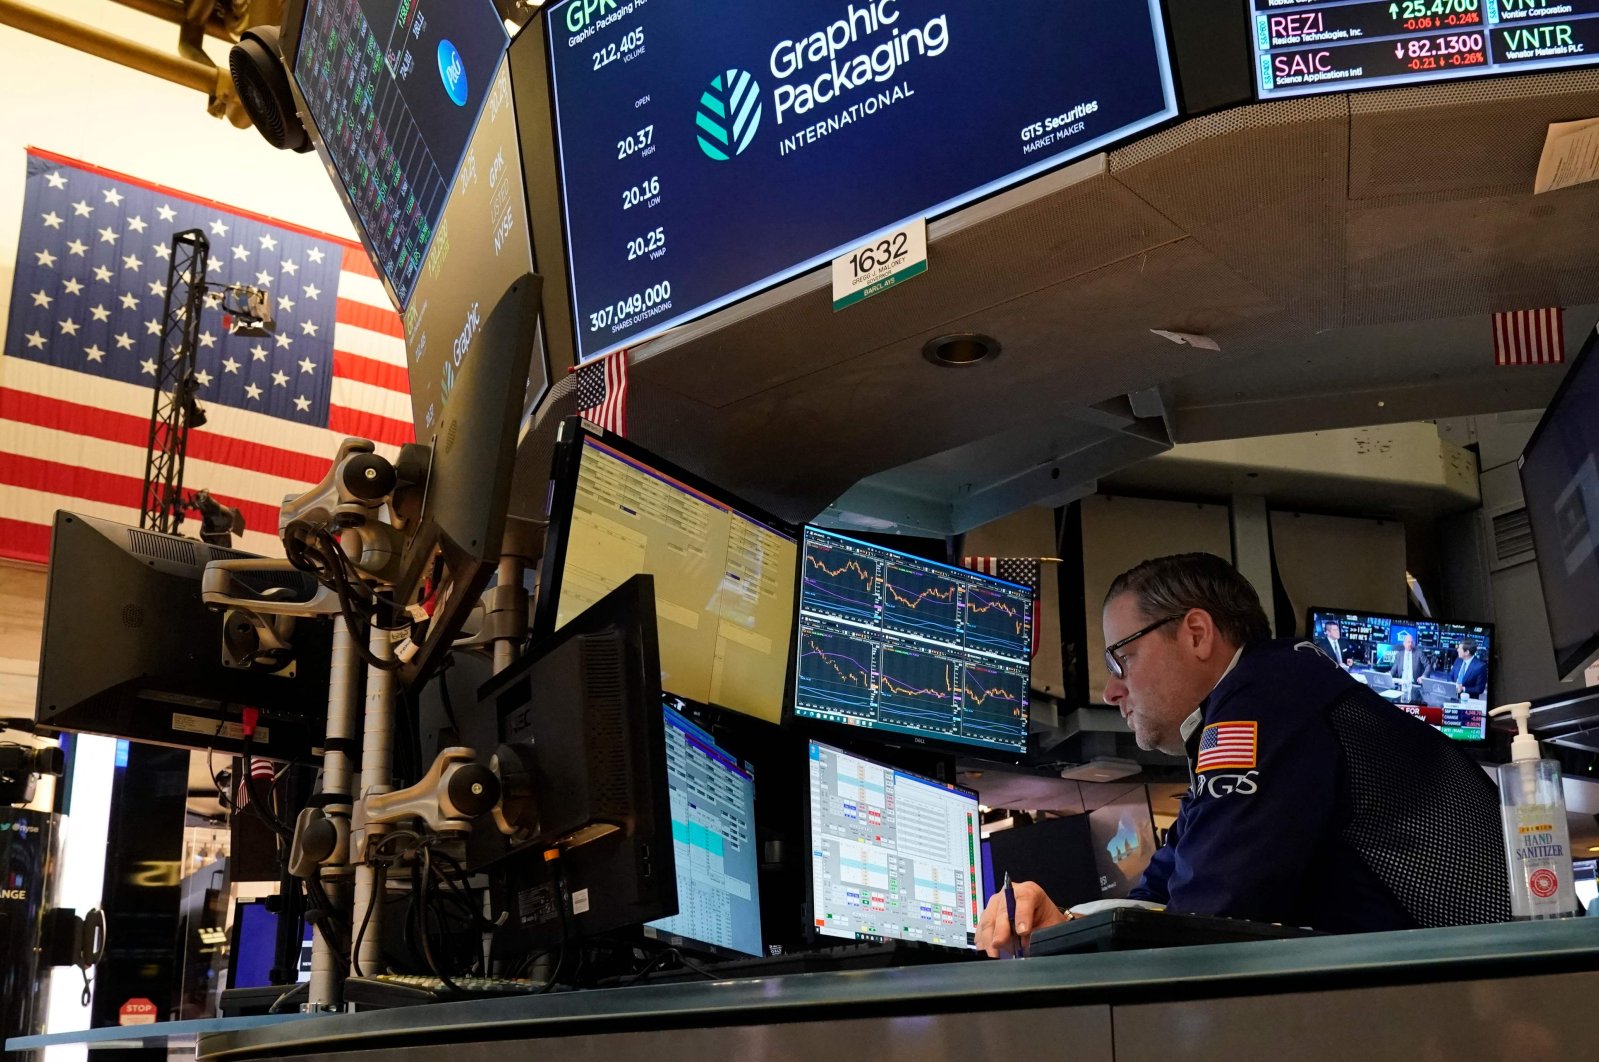 Traders work on the floor of the New York Stock Exchange at the opening bell, New York, U.S., Feb. 22, 2022. (AFP Photo)